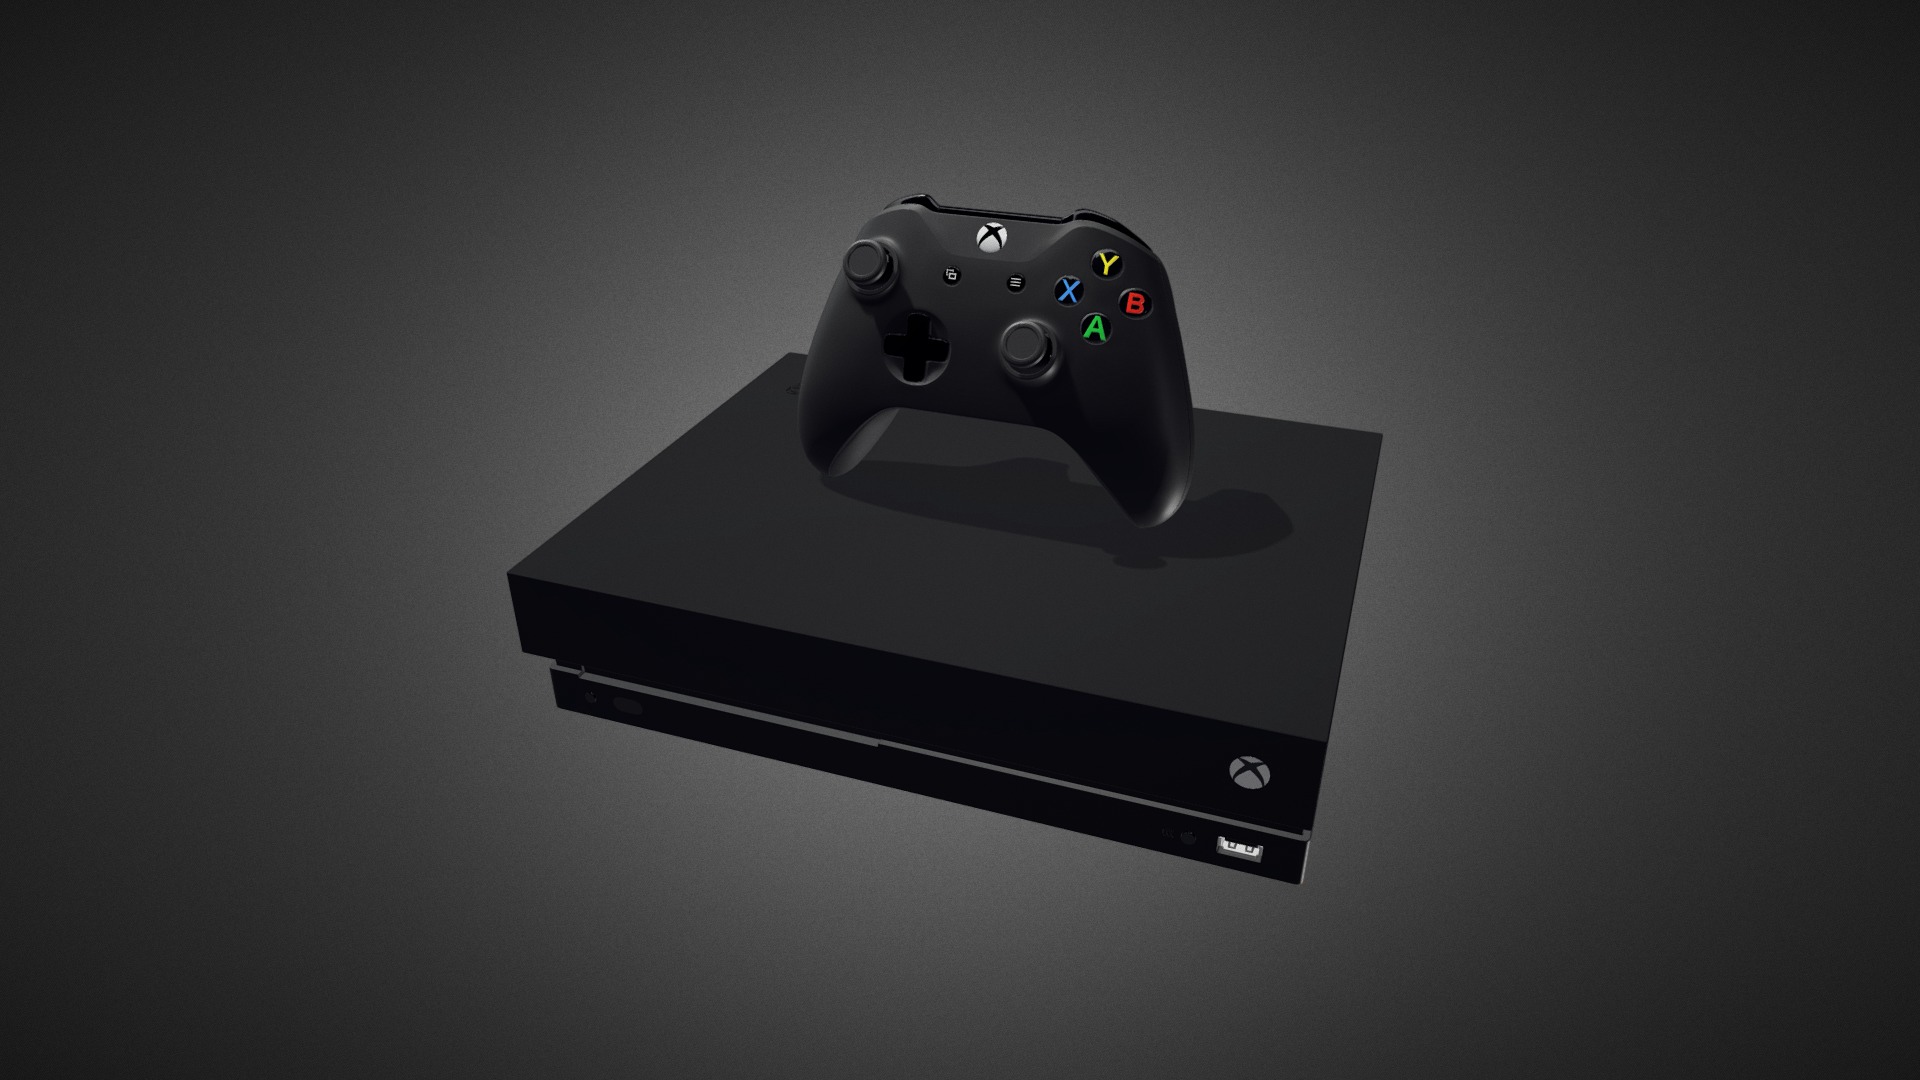 3D model Xbox One X for Element 3D - This is a 3D model of the Xbox One X for Element 3D. The 3D model is about a black video game controller.